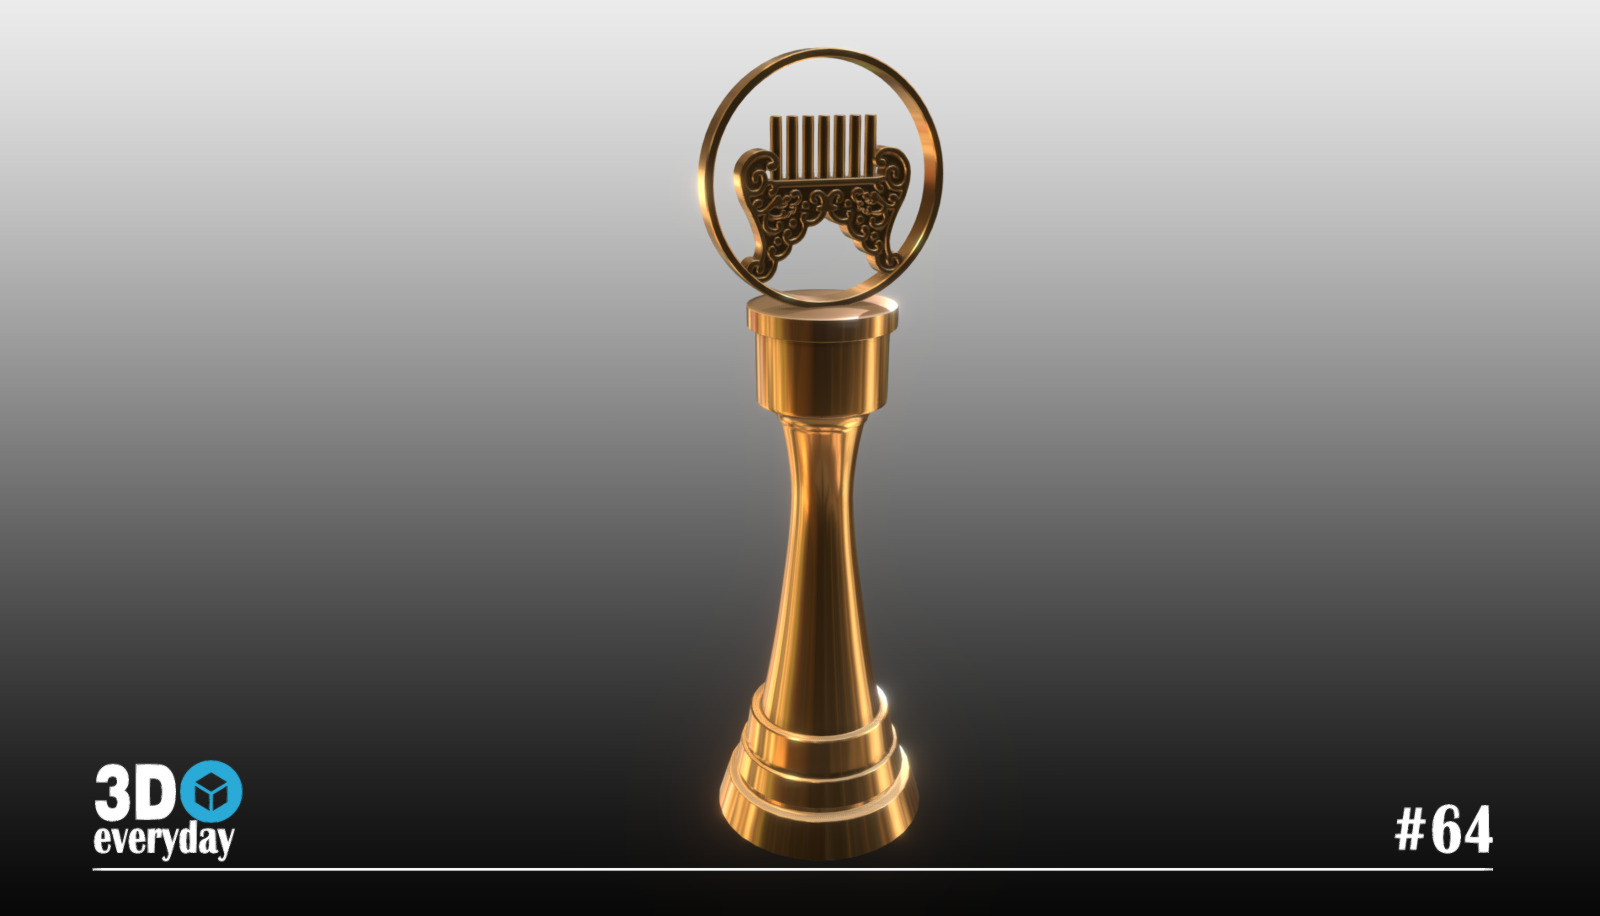 The Golden Melody award (金曲獎) is the taiwanese version of the Grammy awards, since 1990. In the last edition, JJ Lin (林俊傑) won the award in best male singer. Listen to one of his best songs here: Twilight. Modeled in Blender, ready for 3D print 3d model